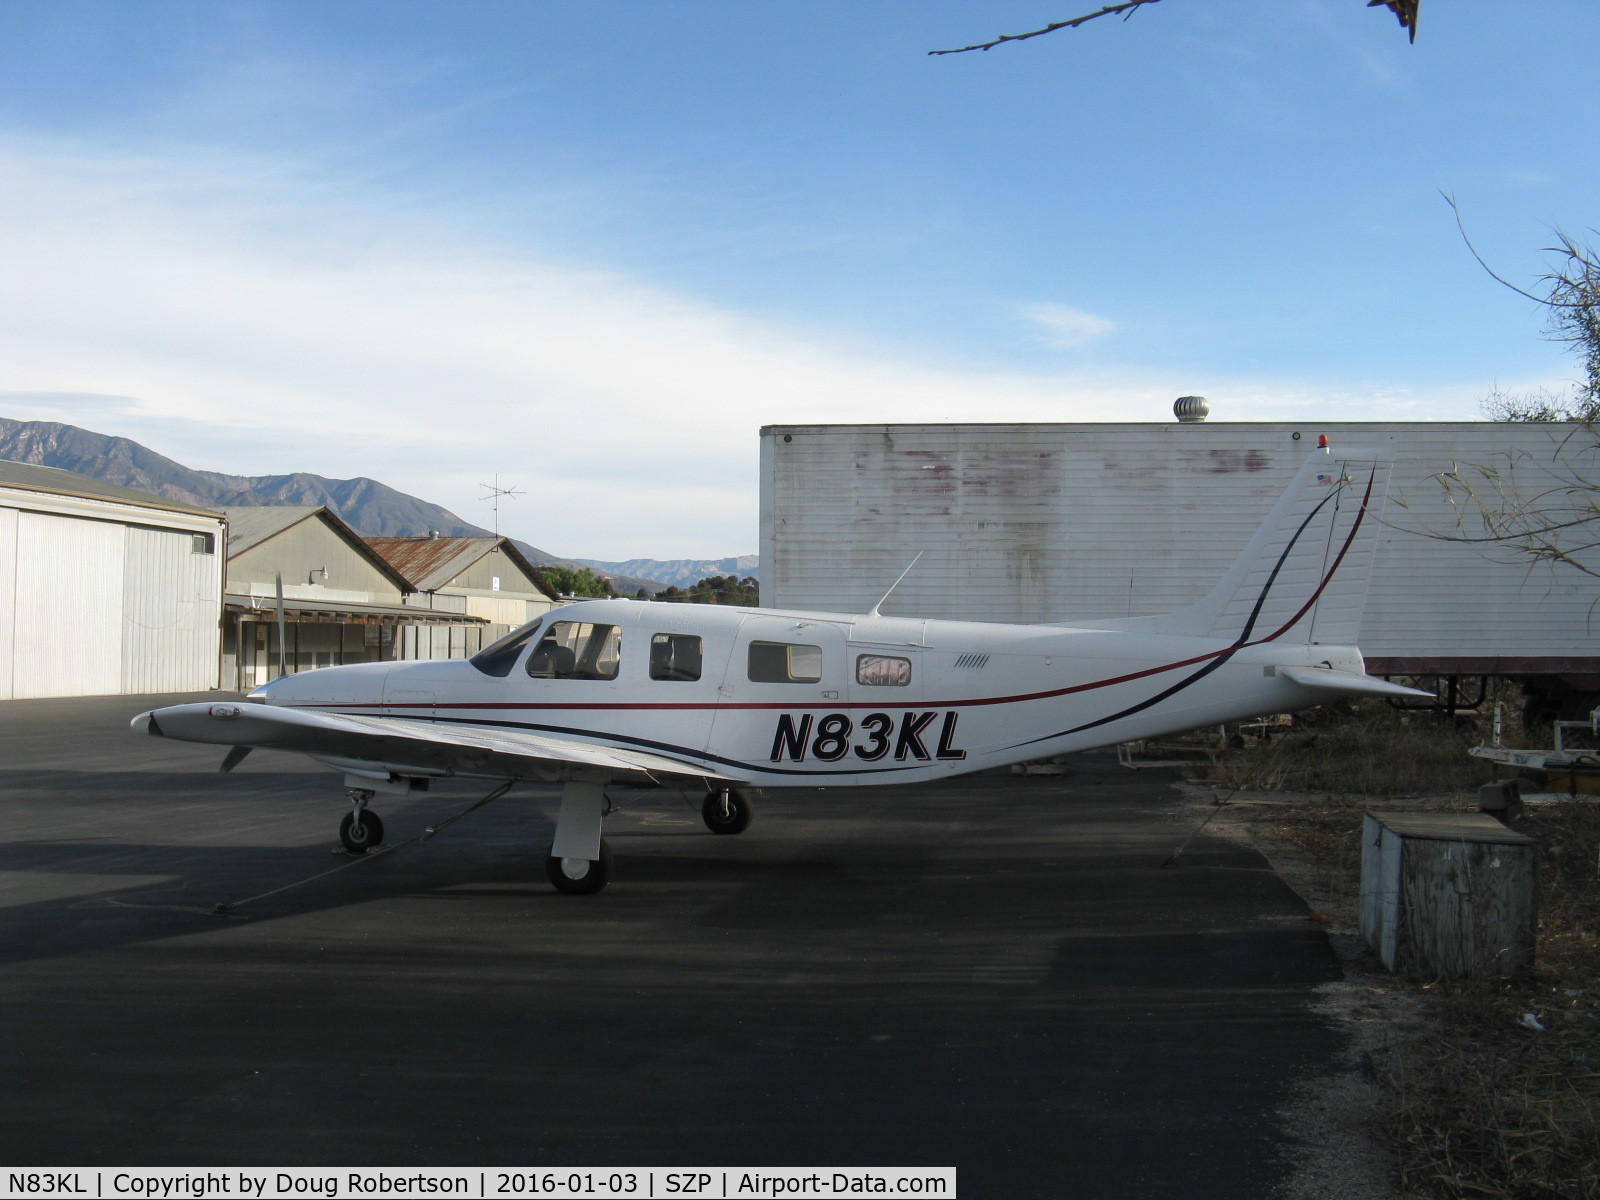 N83KL, 1999 Piper PA-32R-301 Saratoga SP C/N 3246129, 1999 Piper PA-32R SARATOGA SP, Lycoming IO-540-K1G5D 300 Hp, seating for seven, SARATOGAs back to conventional tail after LANCE II T-tail fiasco